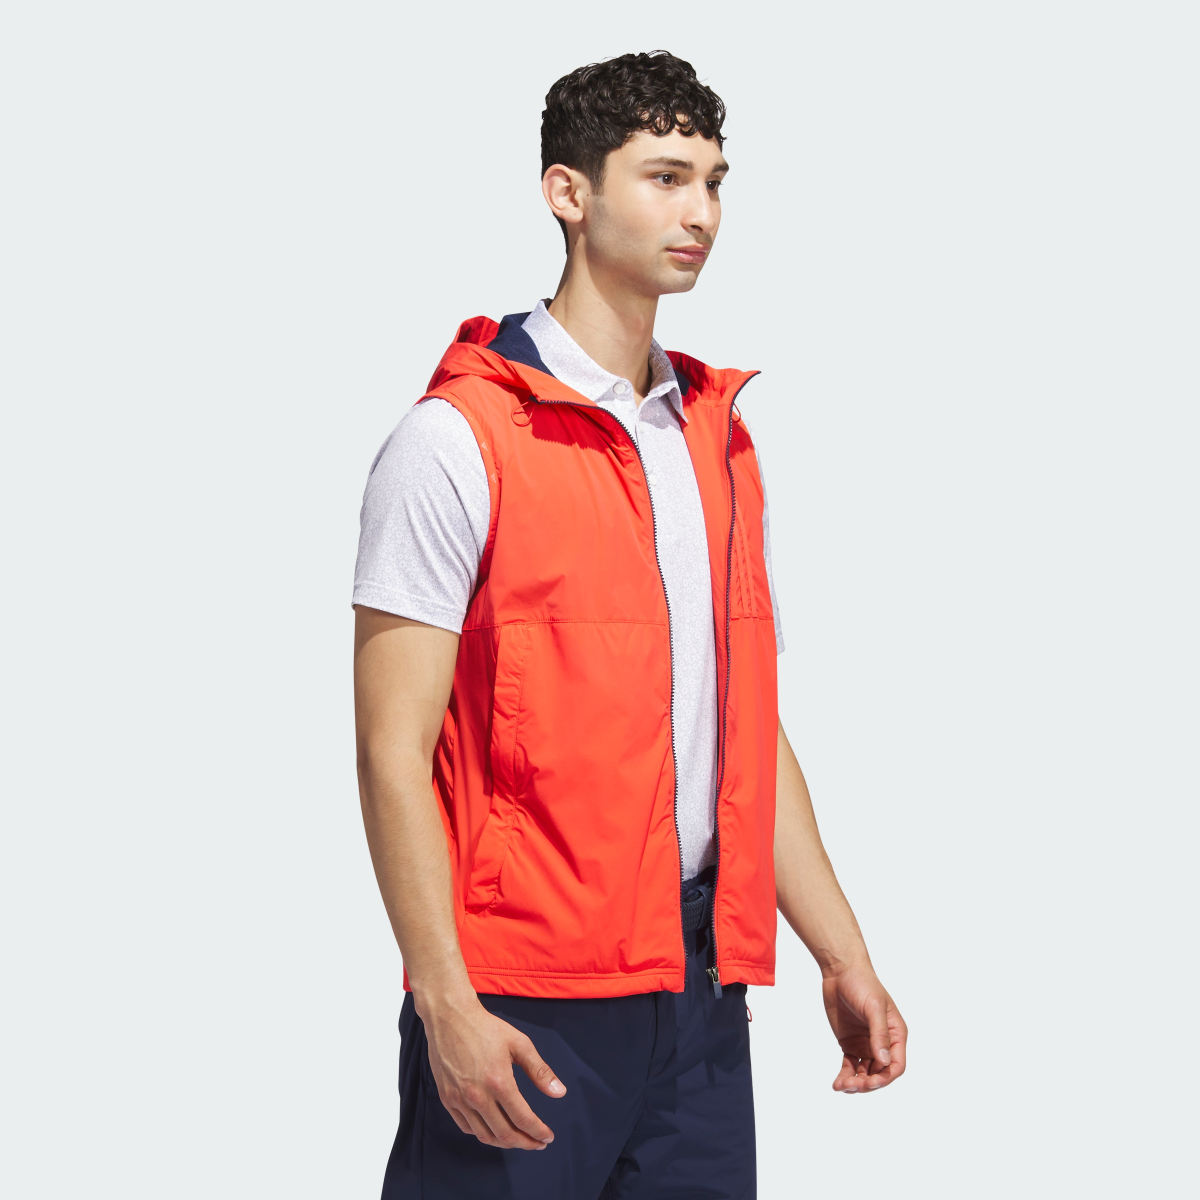 Adidas Ultimate365 Tour WIND.RDY Vest. 4